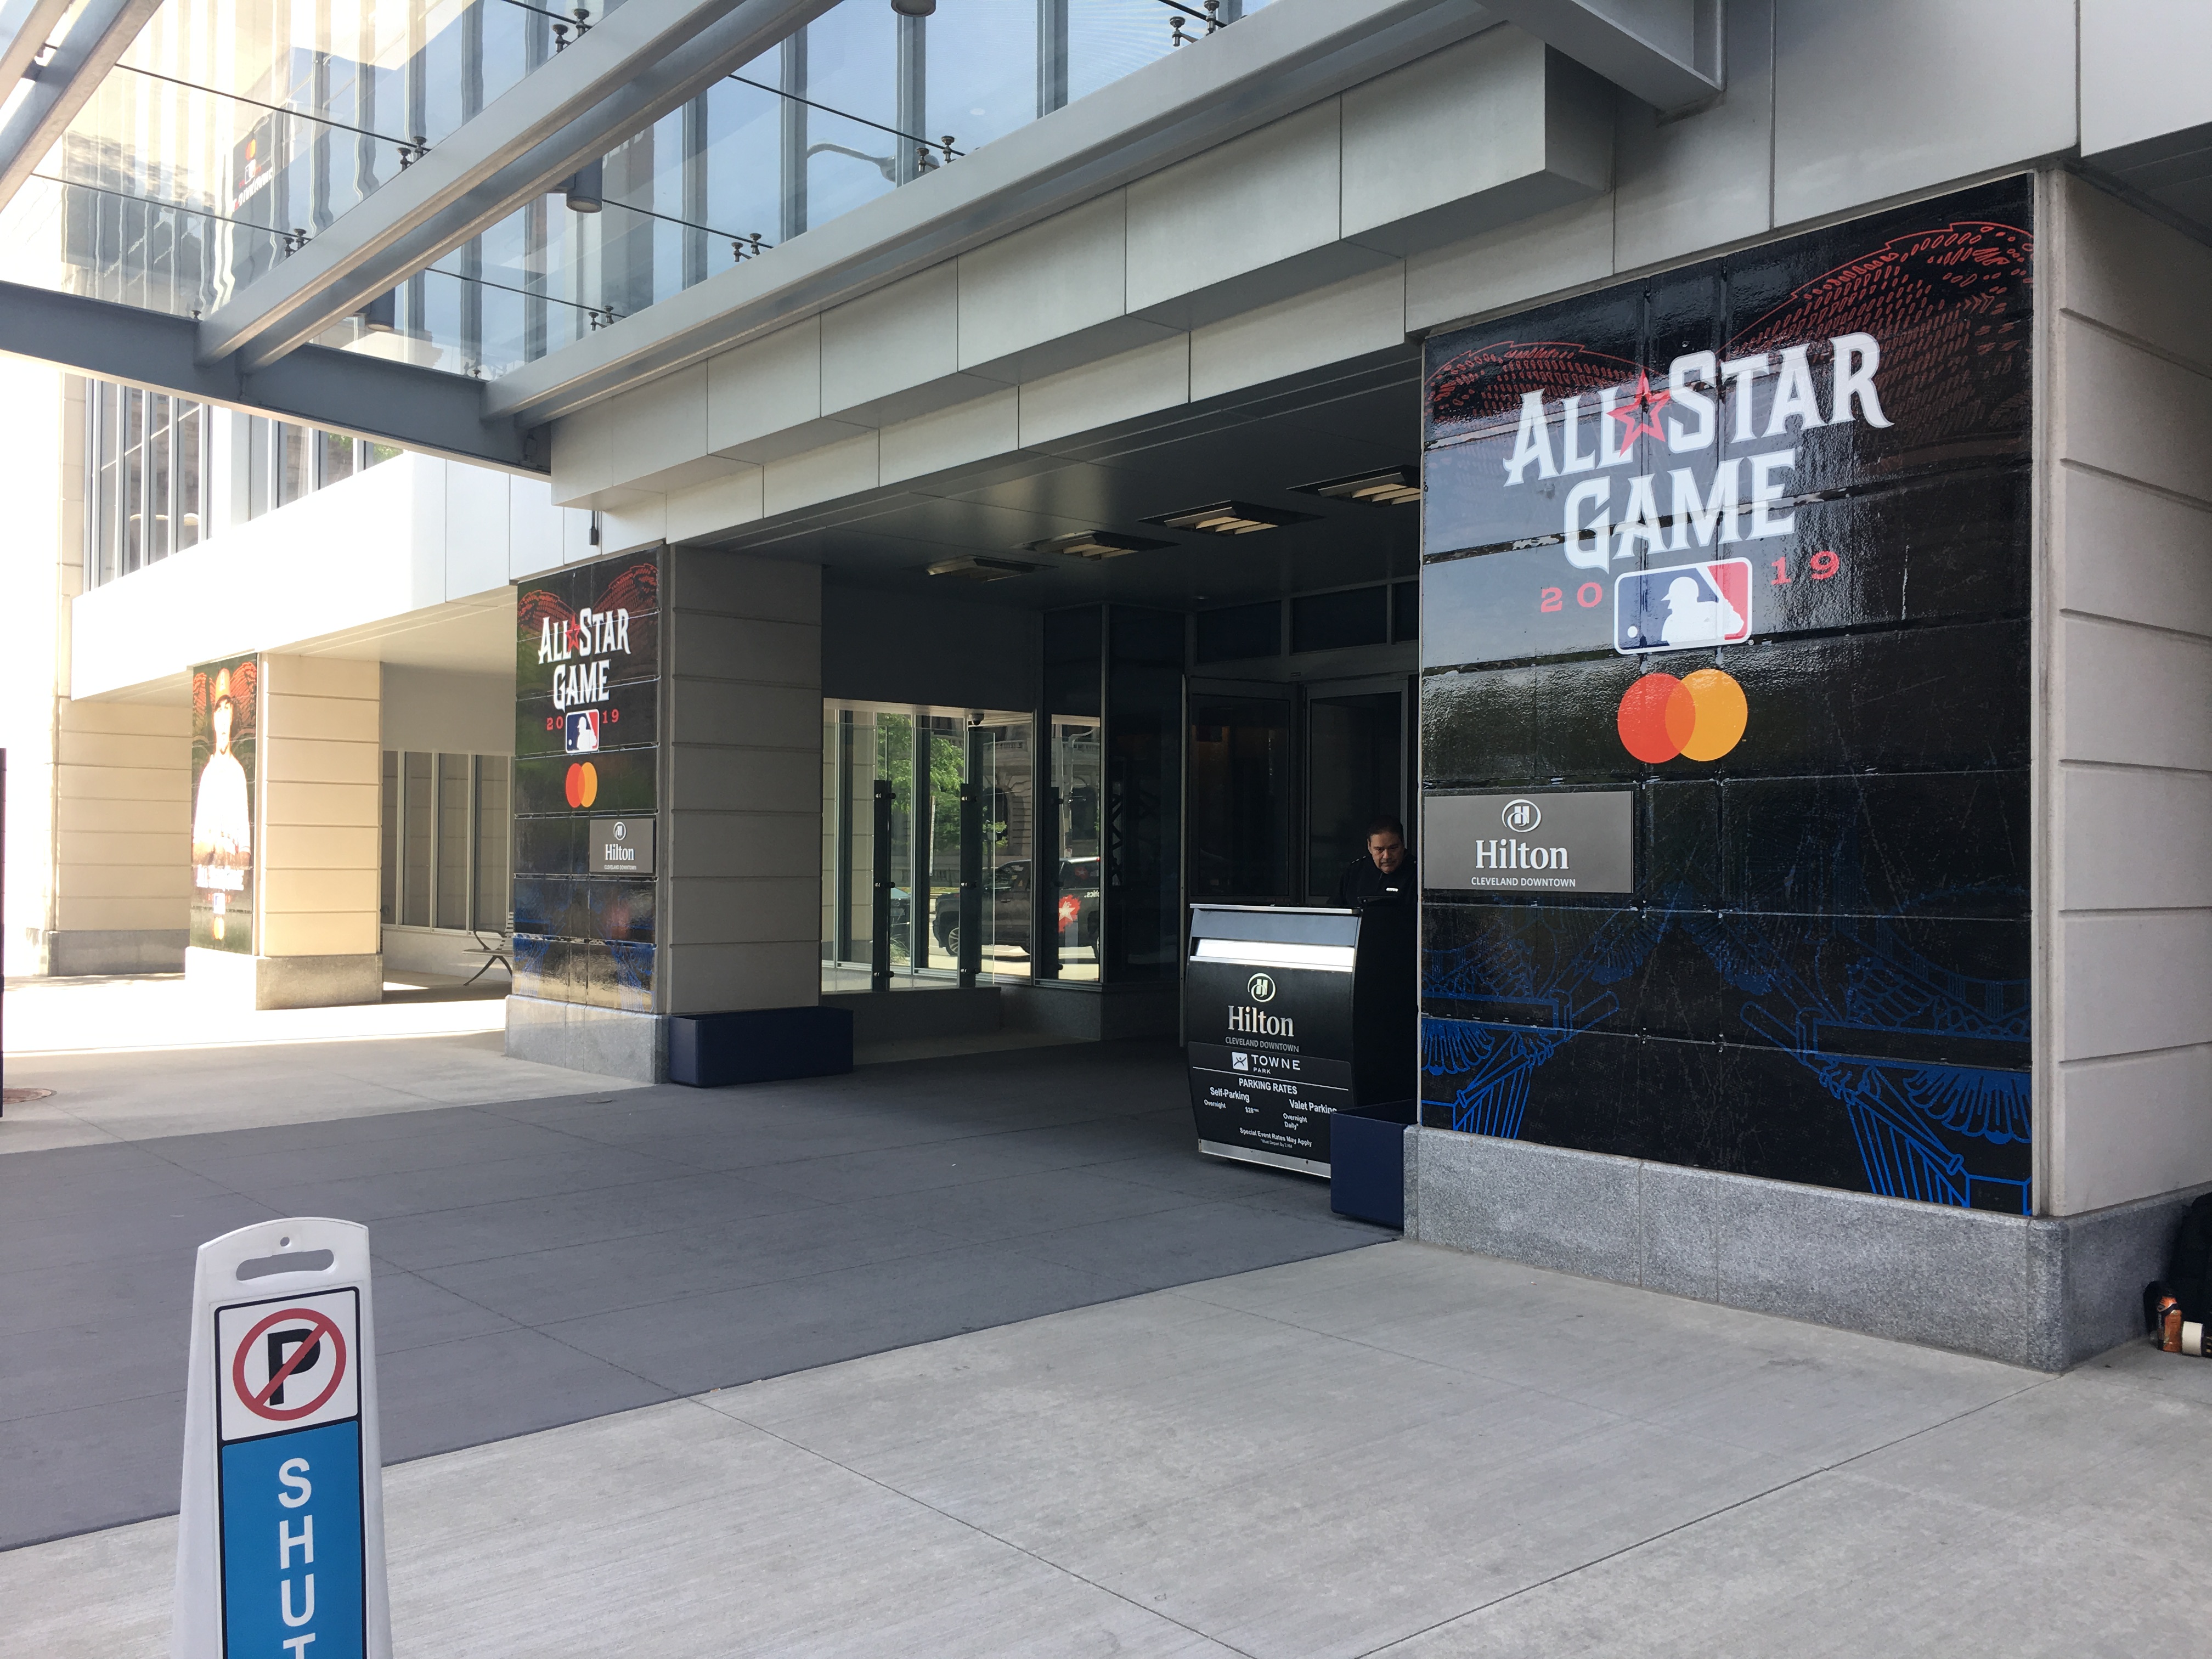 All Star Game wall graphics